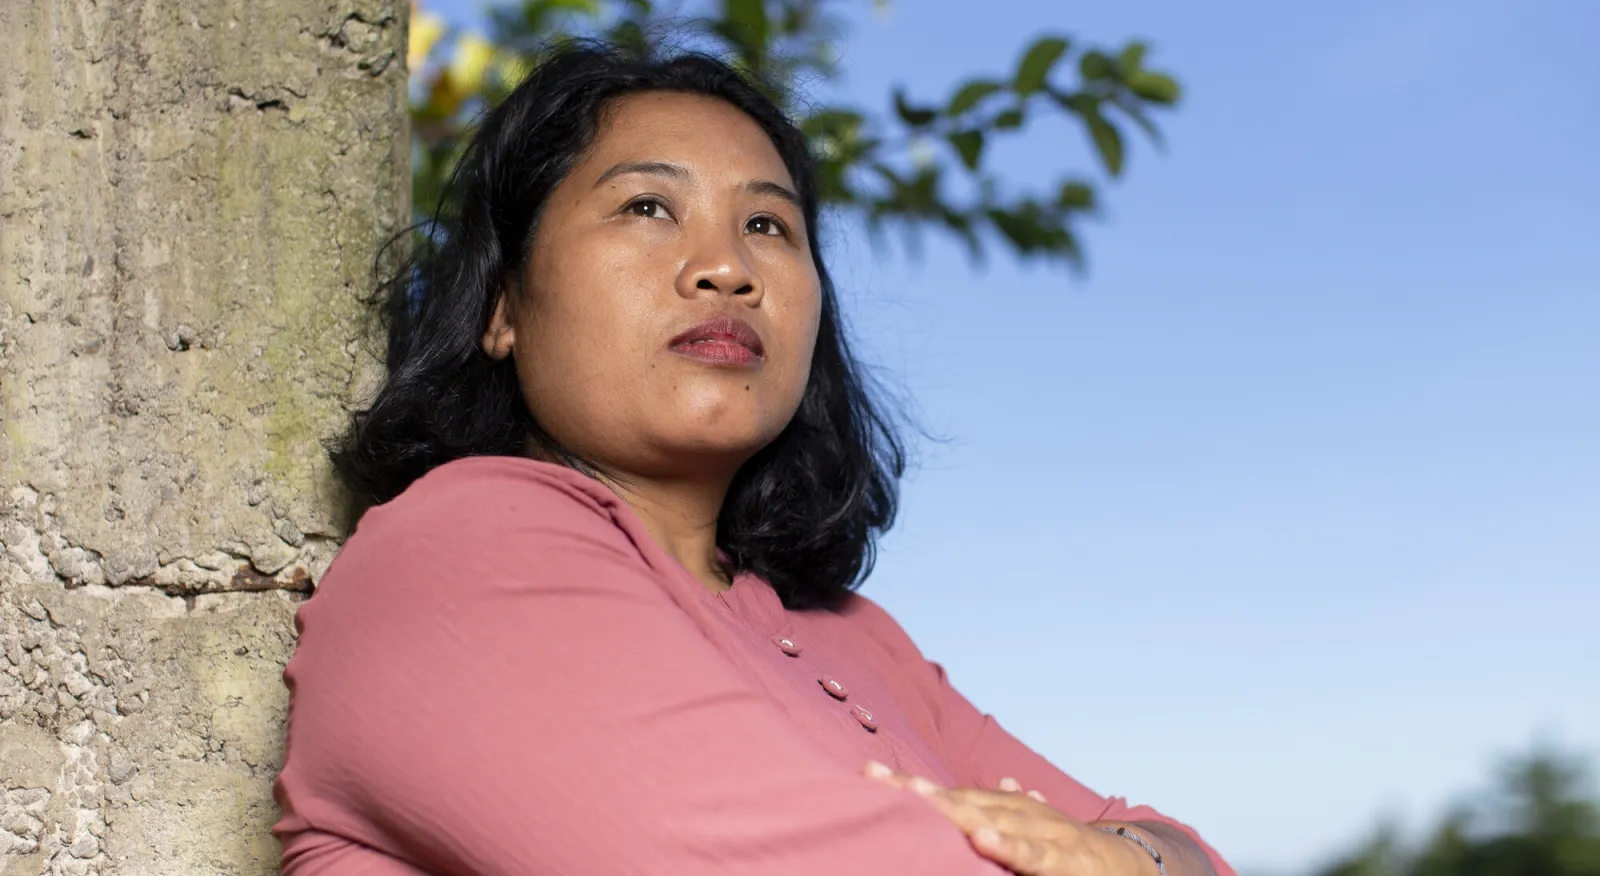 A woman is folding her arms and looking into the distance with a serious expression. She is leaning against a tree with a blue sky backdrop. She has a pink shirt and shoulder length black hair.